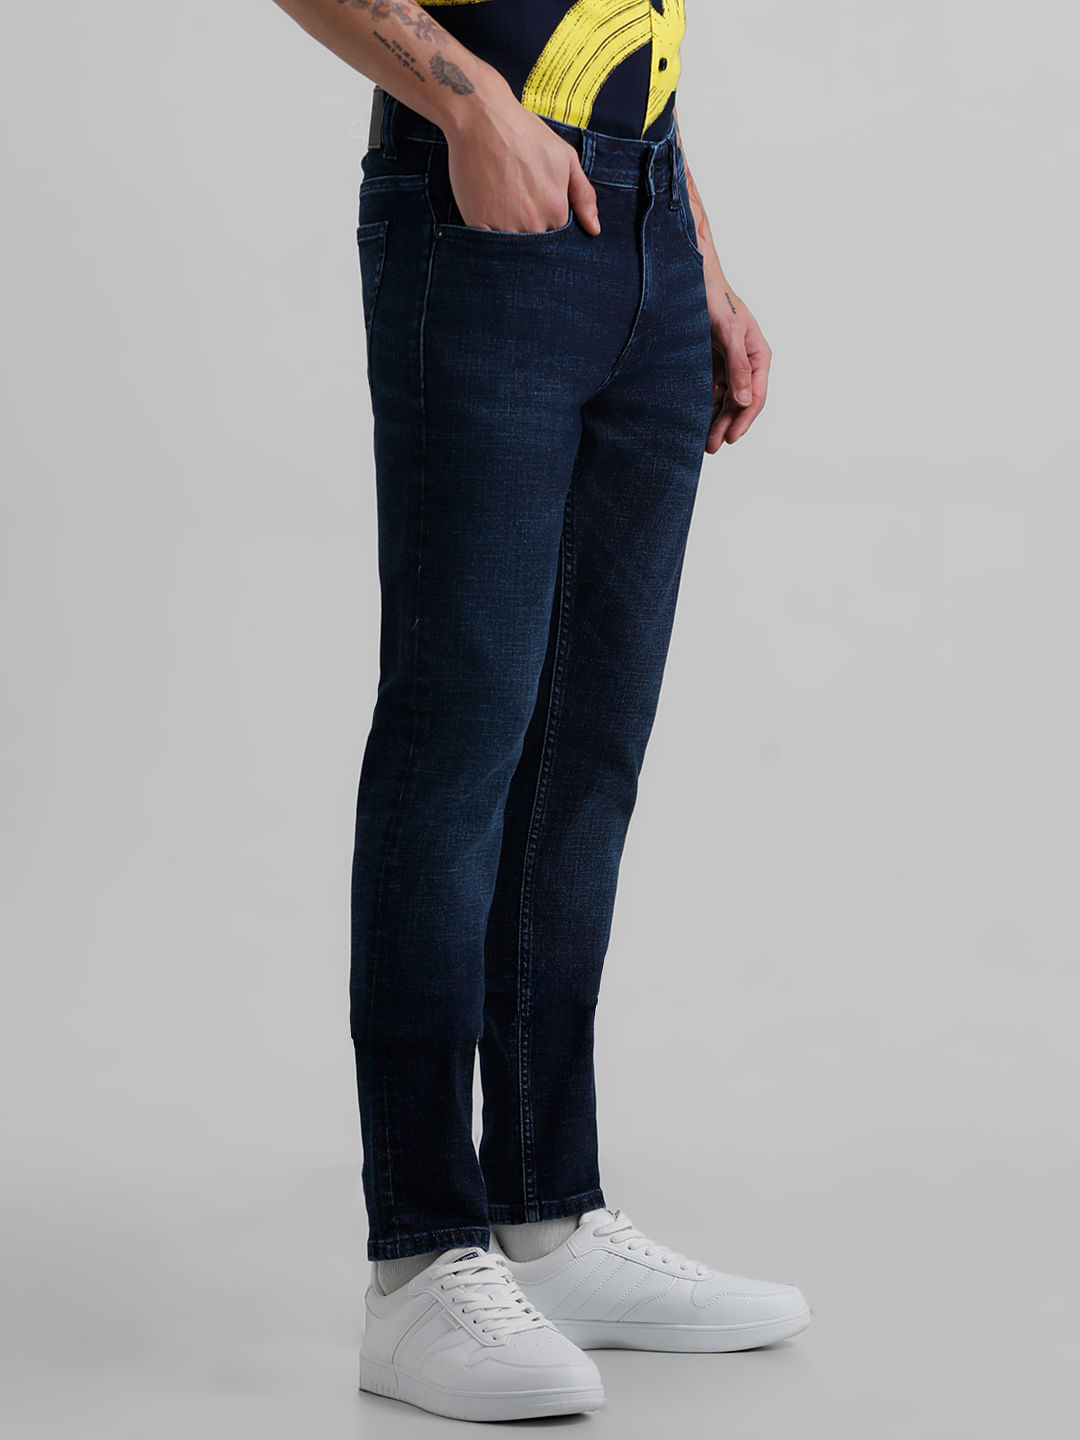 Buy Flying Machine Jackson Skinny Fit Low Rise Jeans - NNNOW.com